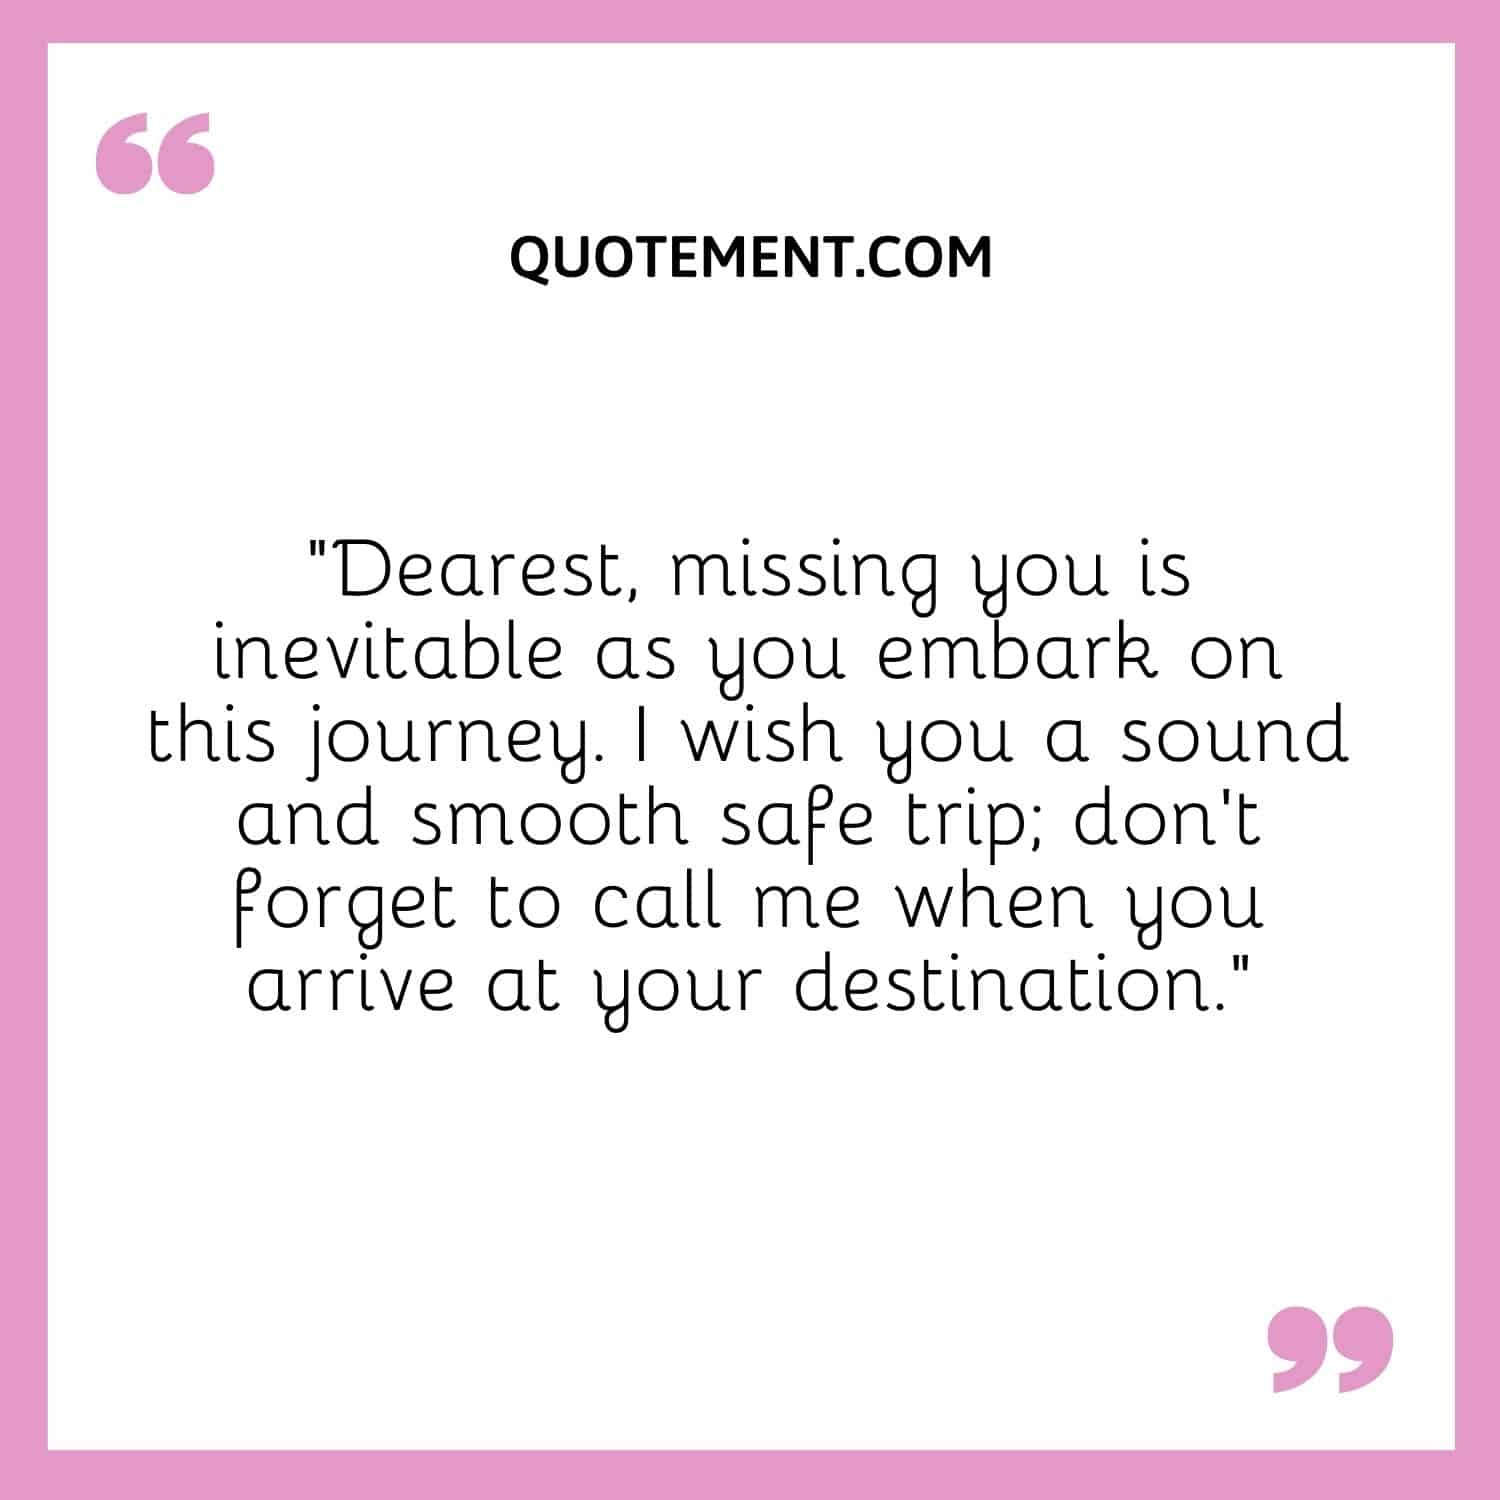 “Dearest, missing you is inevitable as you embark on this journey. I wish you a sound and smooth safe trip; don't forget to call me when you arrive at your destination.”